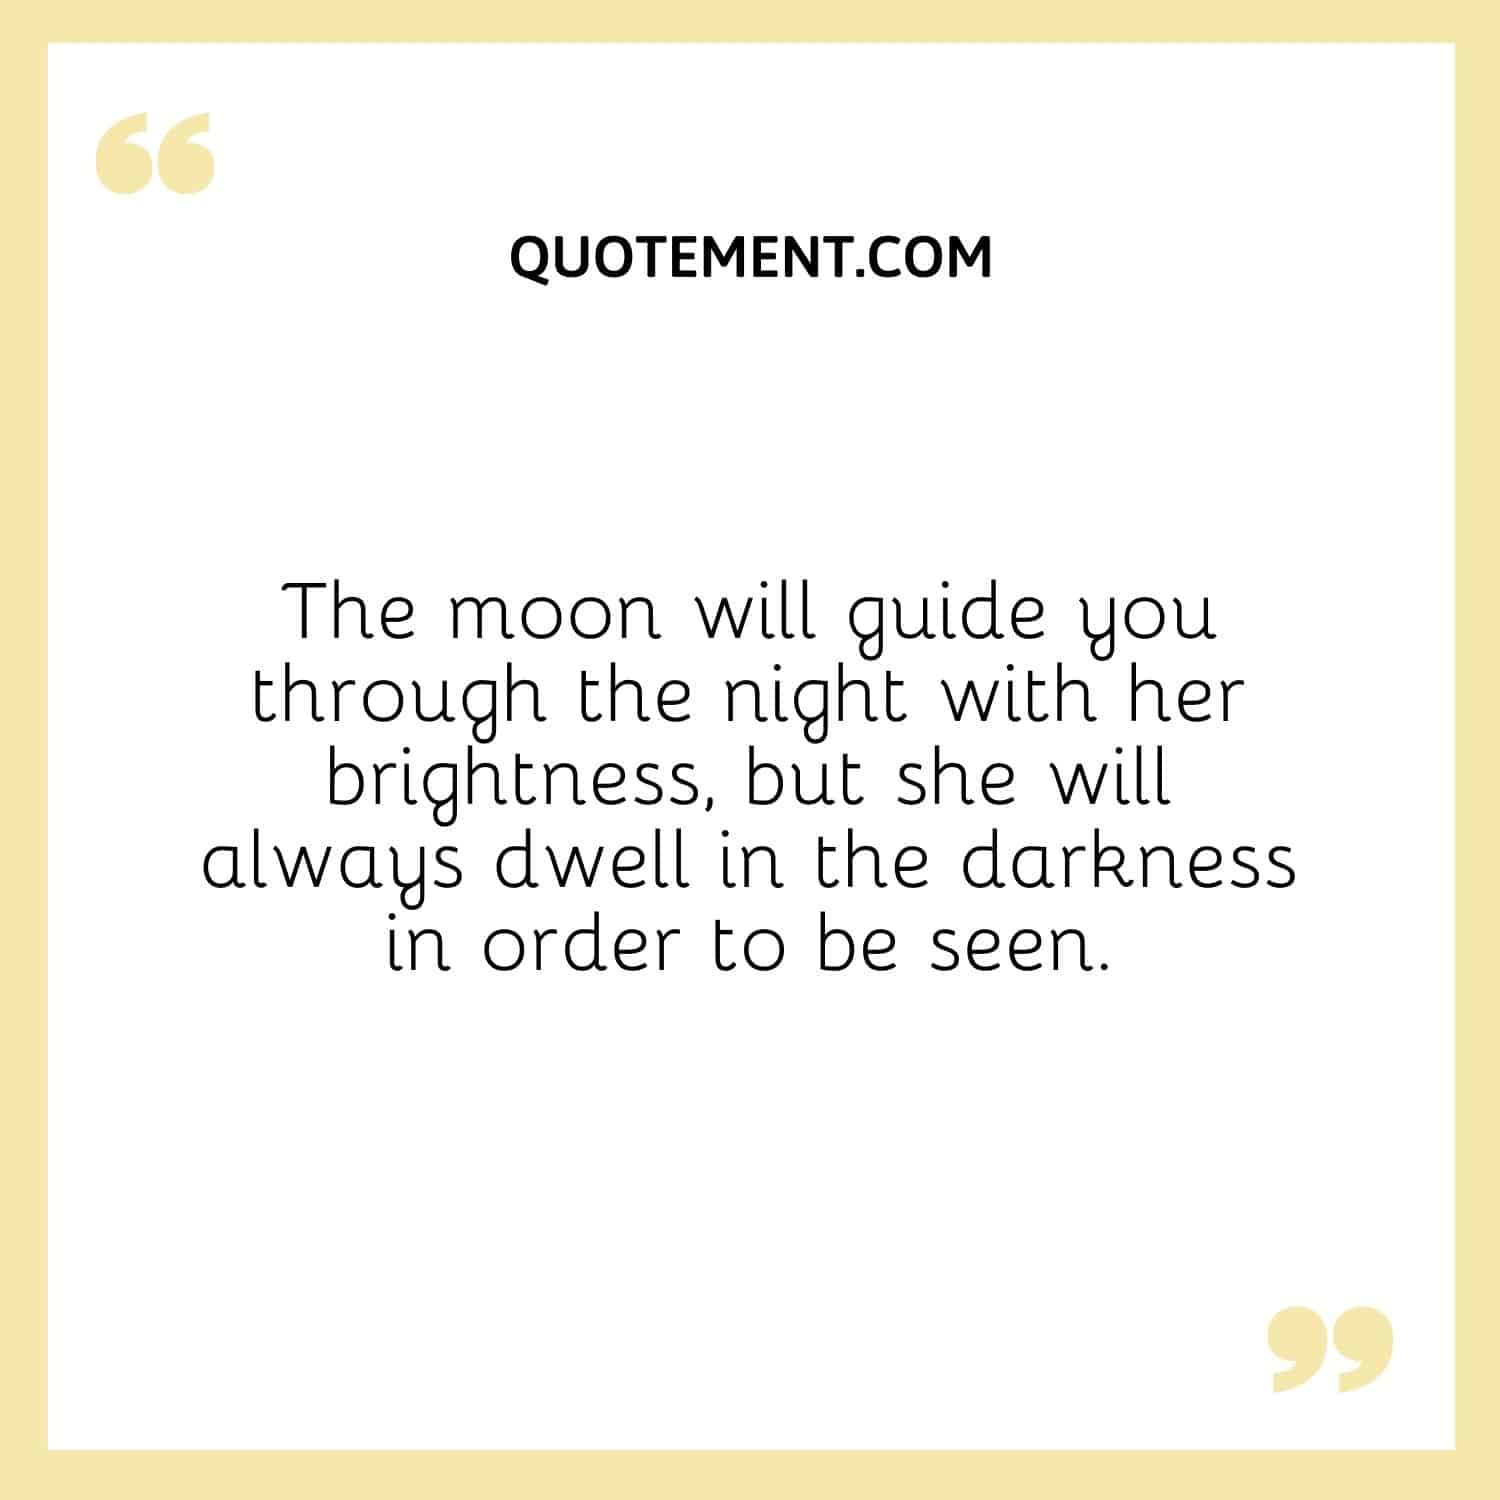 The moon will guide you through the night with her brightness, but she will always dwell in the darkness in order to be seen.